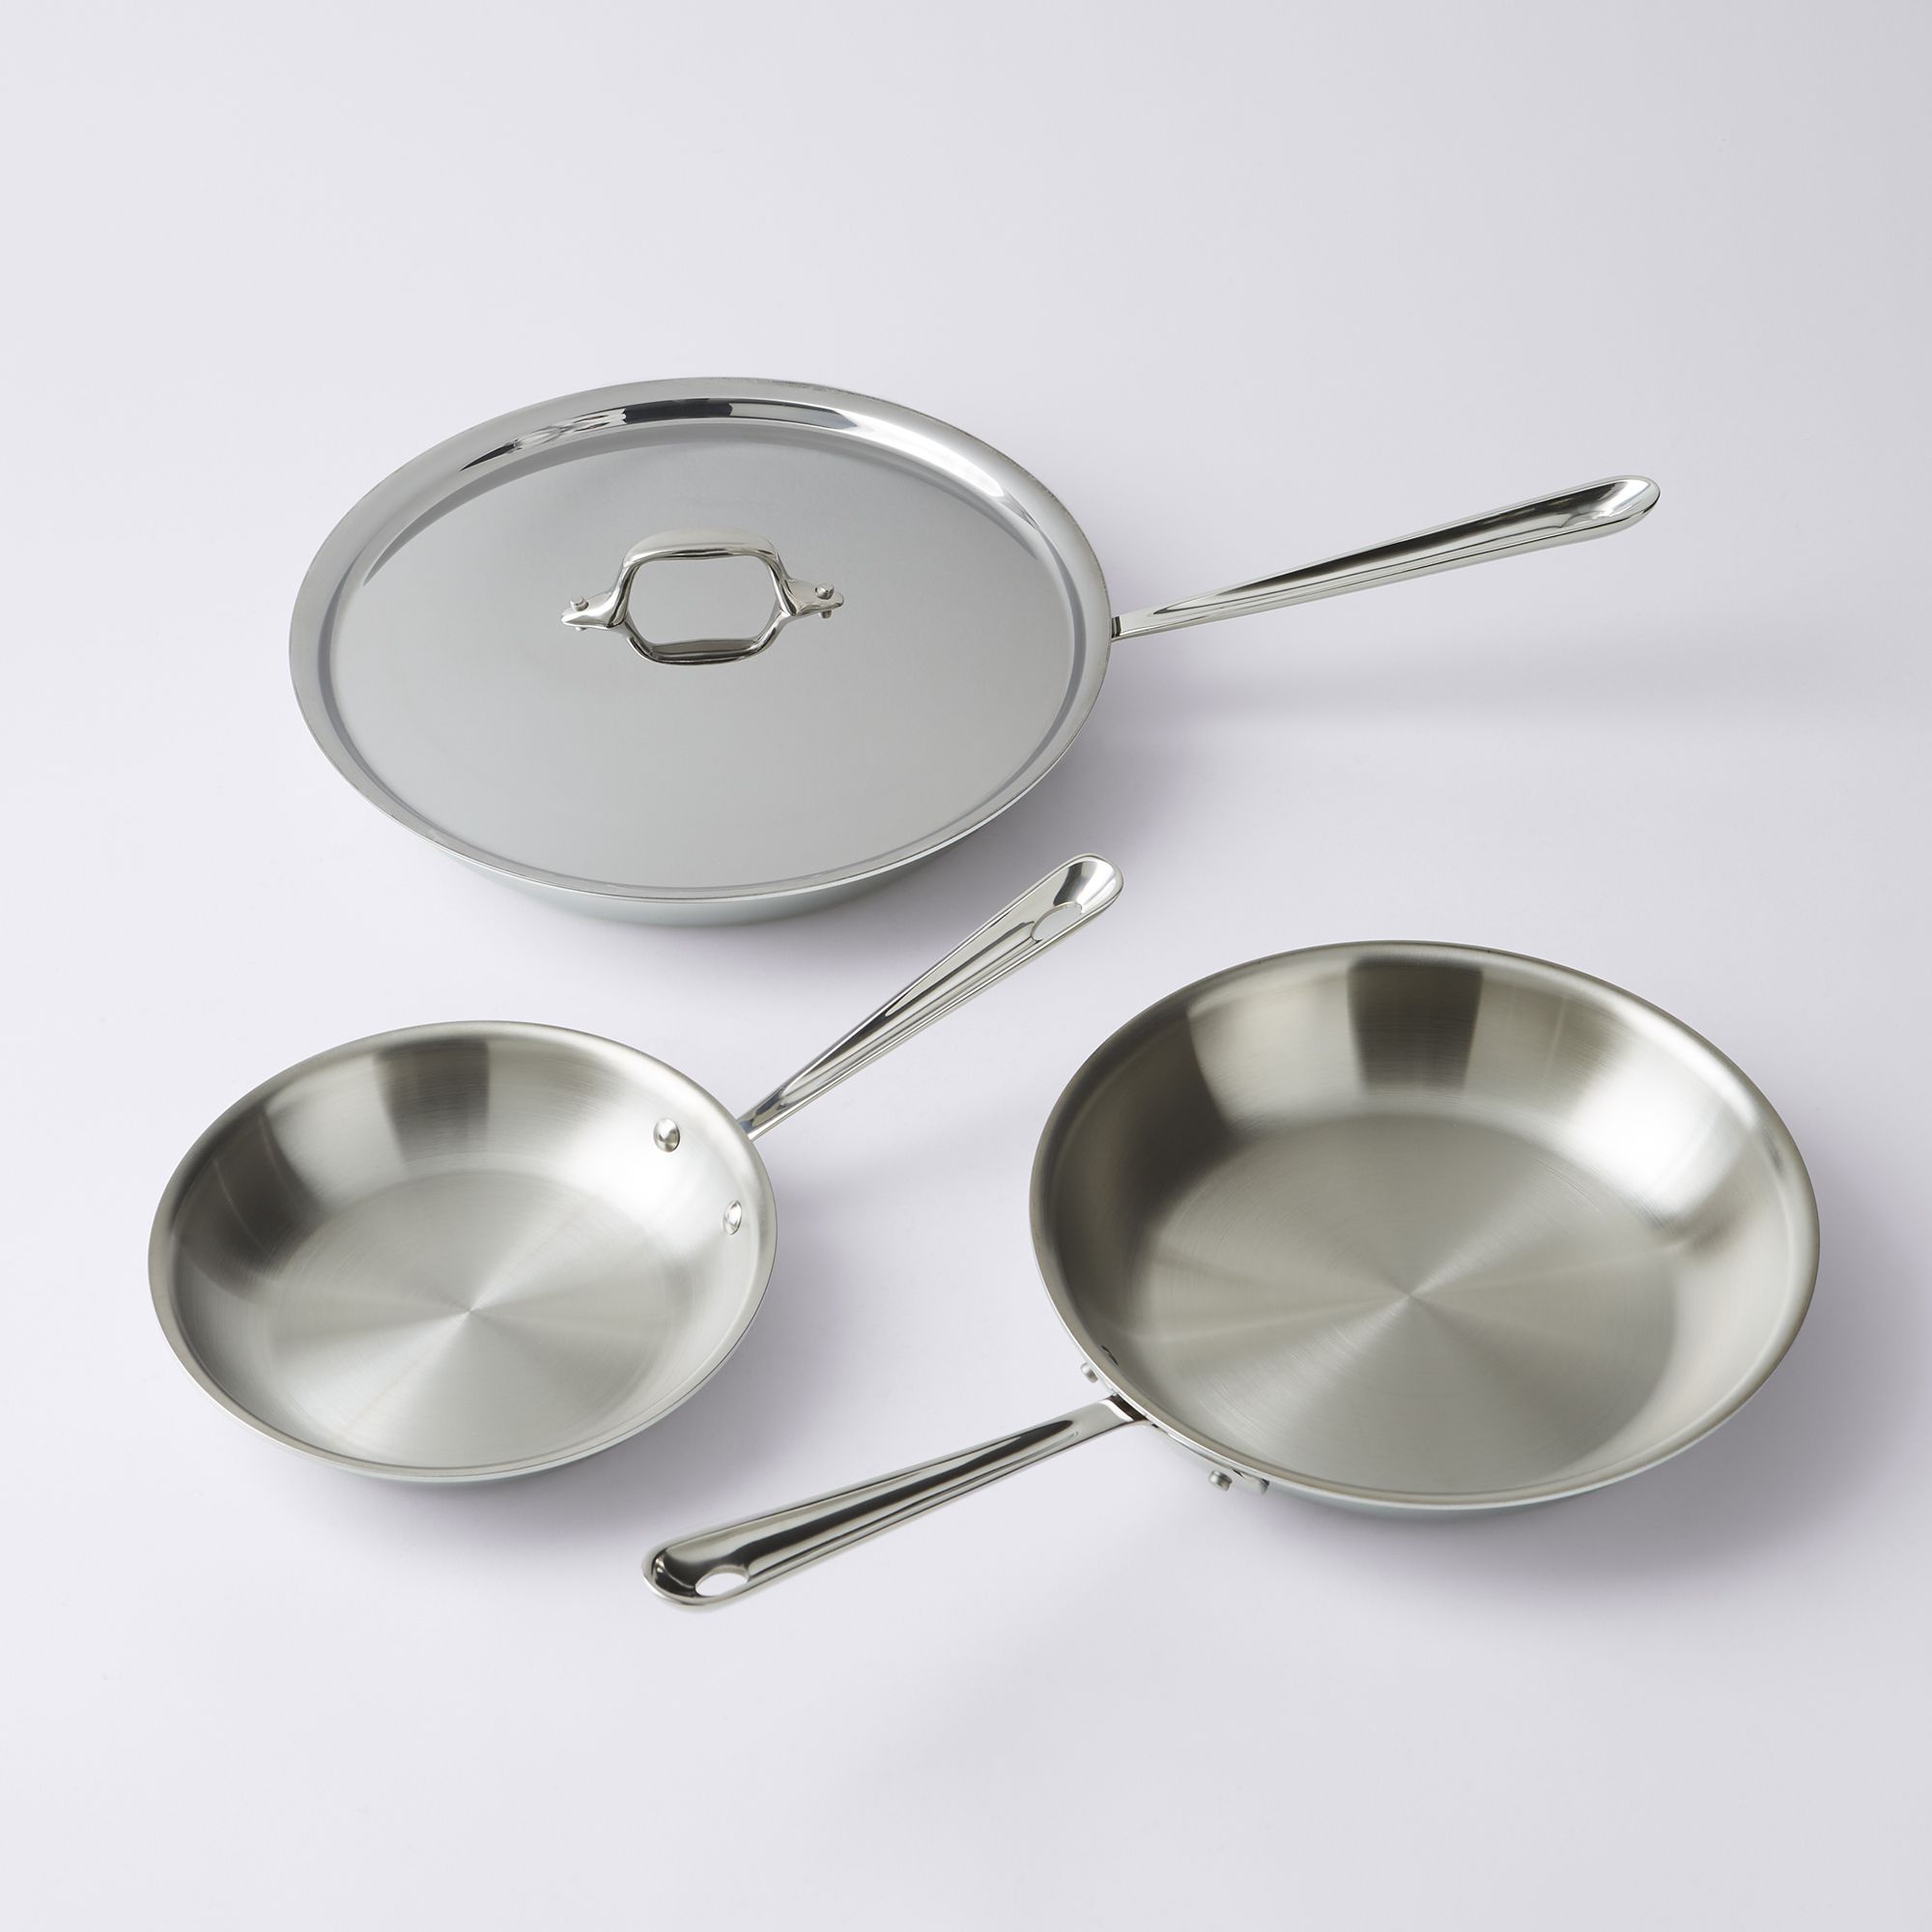 All-Clad Tri-Ply Stainless Steel 8 and 12 Fry Pan Set on QVC